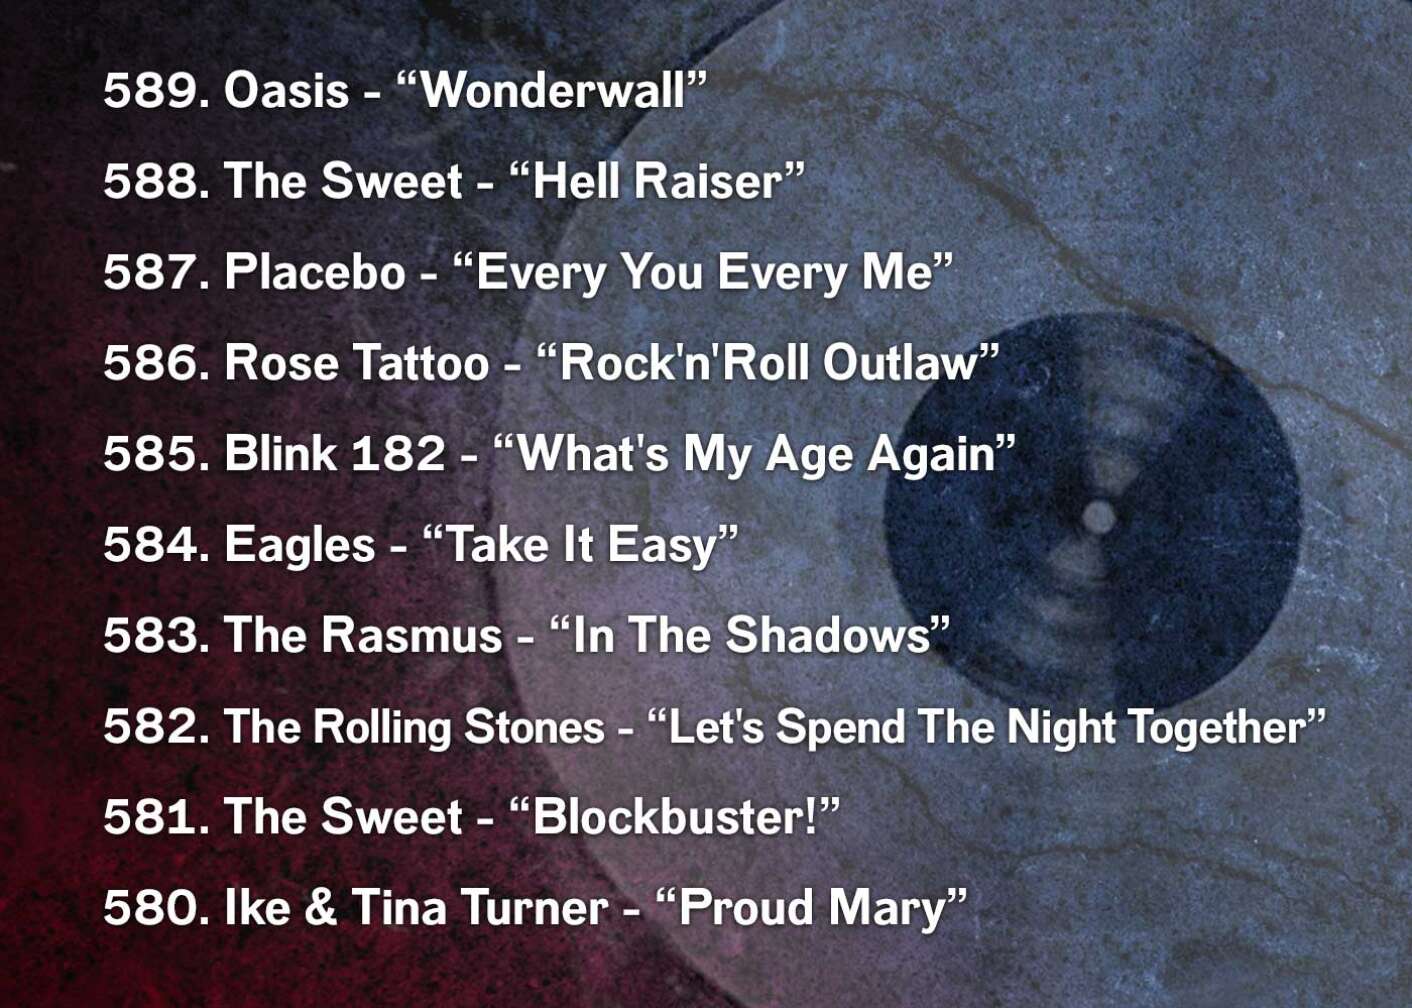 589. Oasis - “Wonderwall” 588. The Sweet - “Hell Raiser” 587. Placebo - “Every You Every Me” 586. Rose Tattoo - “Rock'n'Roll Outlaw” 585. Blink 182 - “What's My Age Again” 584. Eagles - “Take It Easy” 583. The Rasmus - “In The Shadows” 582. The Rolling Stones - “Let's Spend The Night Together” 581. The Sweet - “Blockbuster!” 580. Ike & Tina Turner - “Proud Mary”